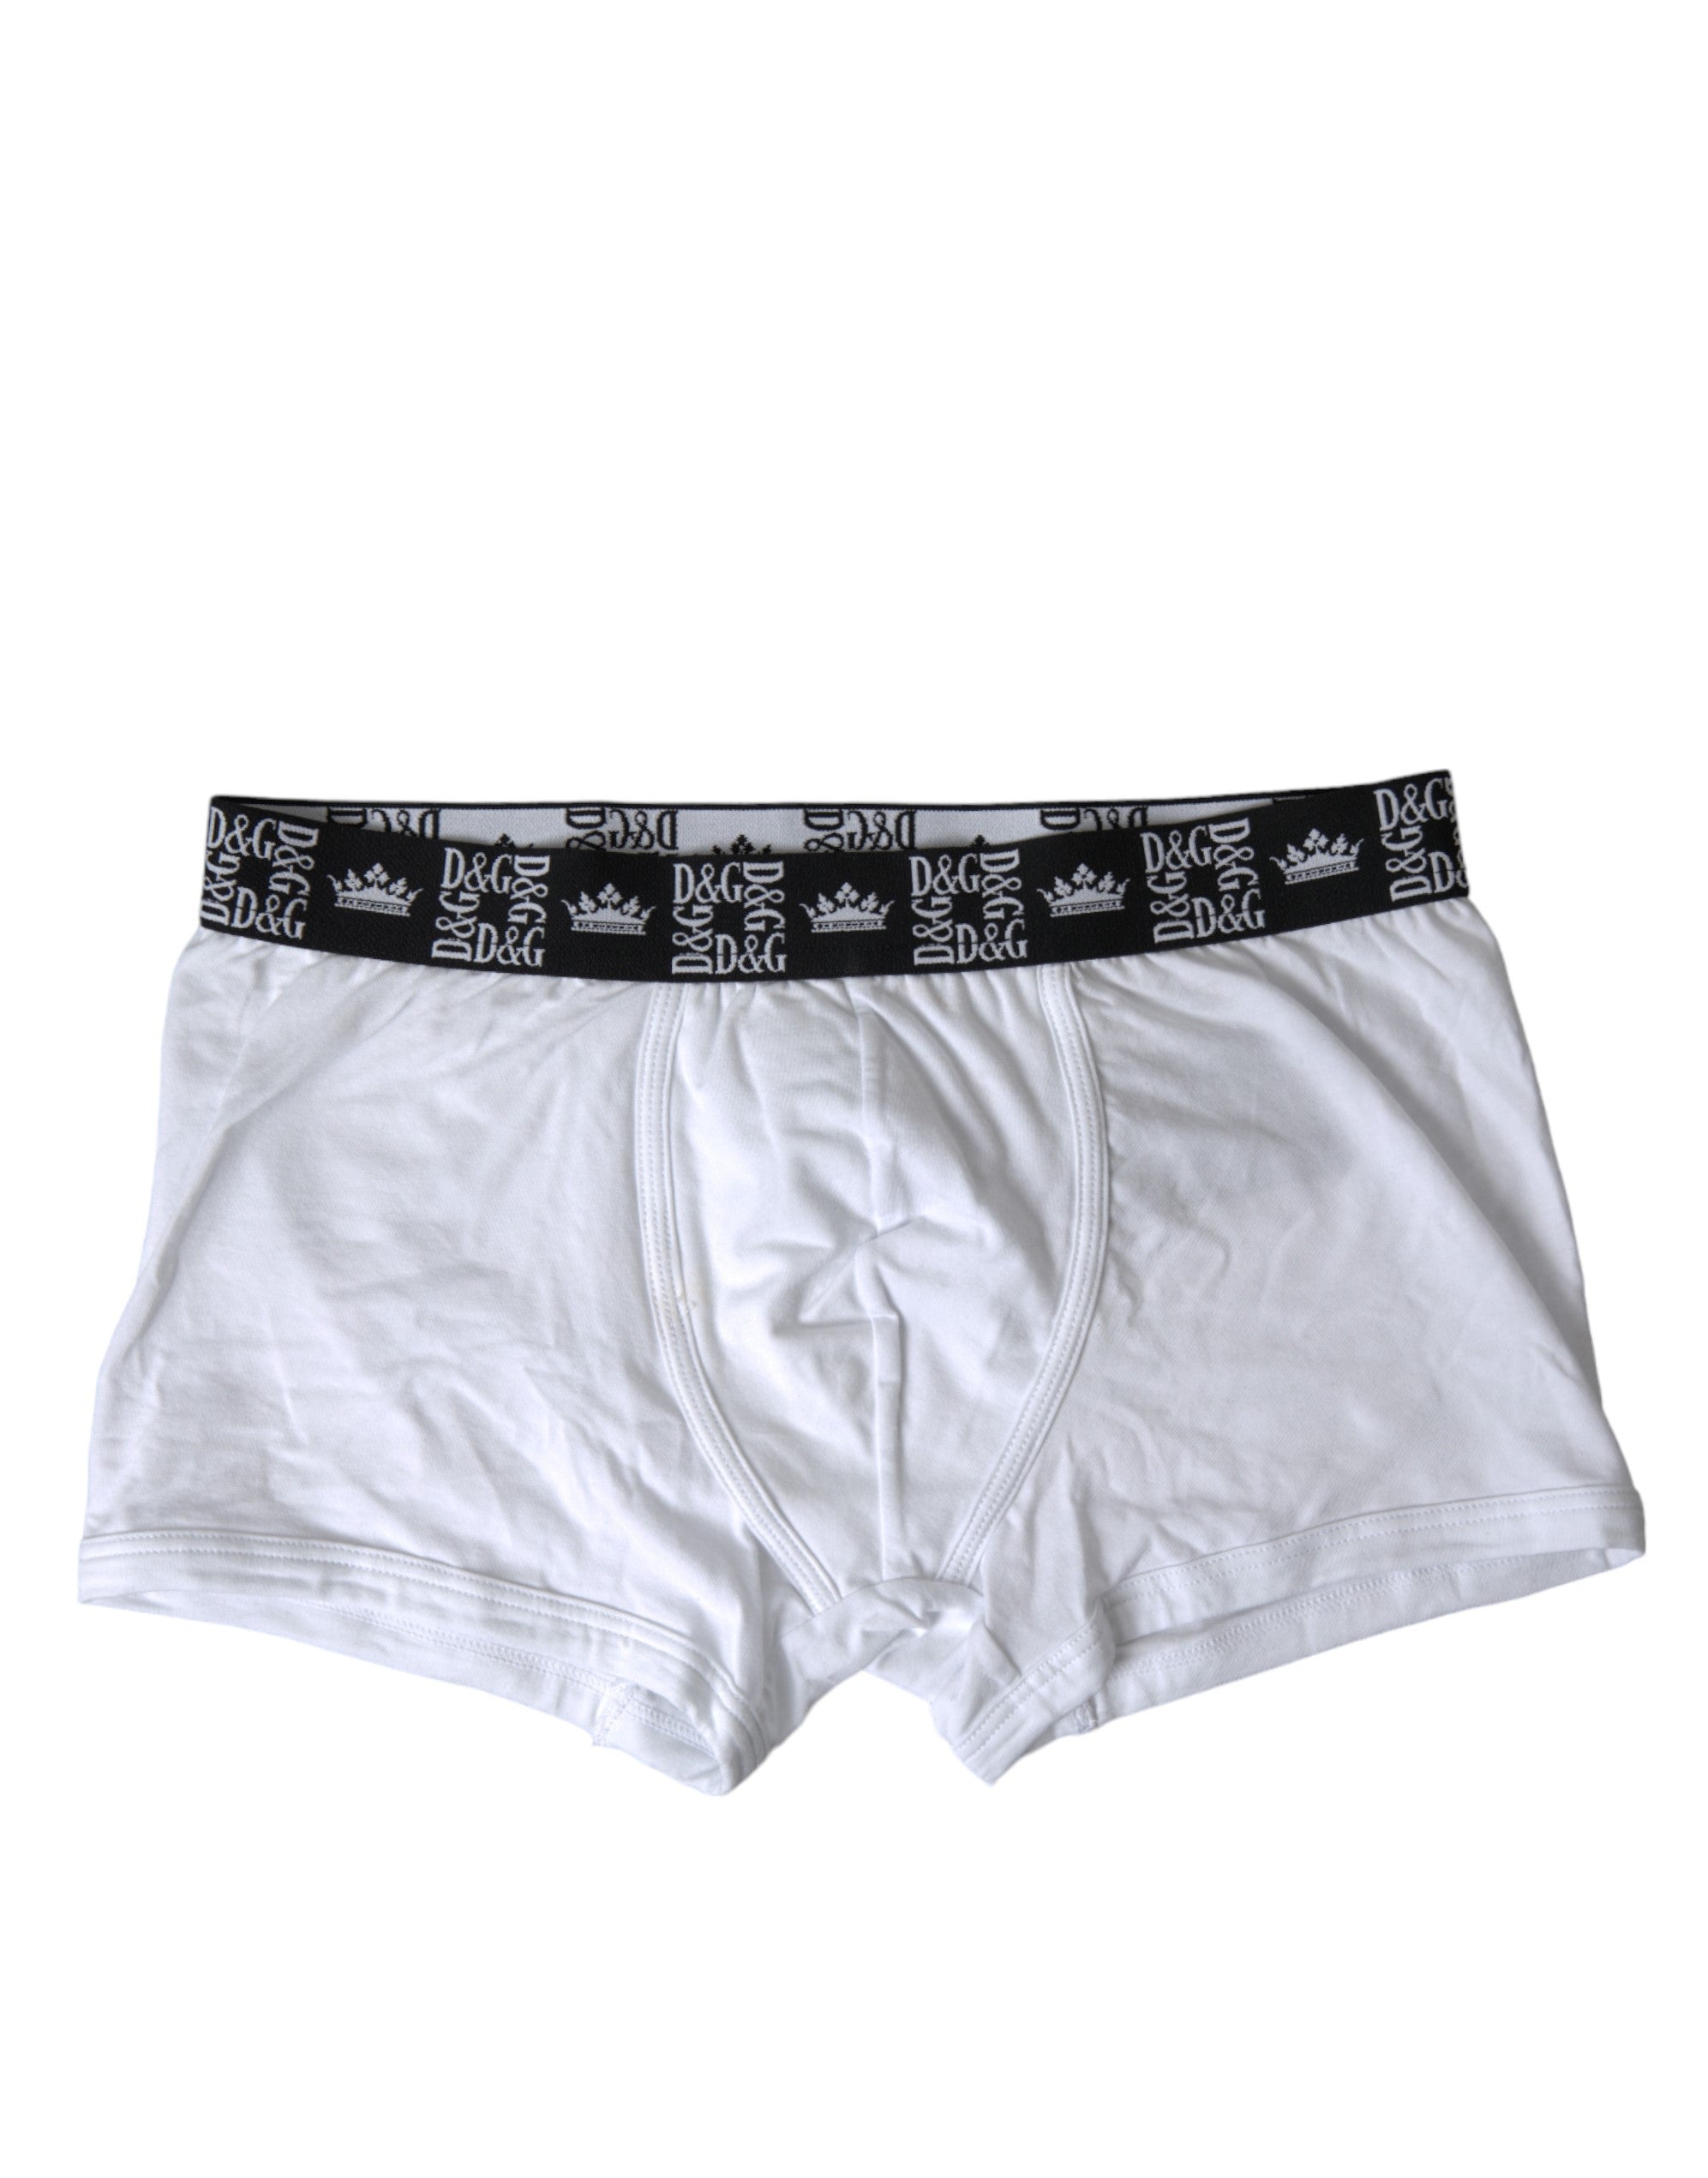 Shop the Latest Men's Cotton Boxers at Best Price – SEYMAYKA